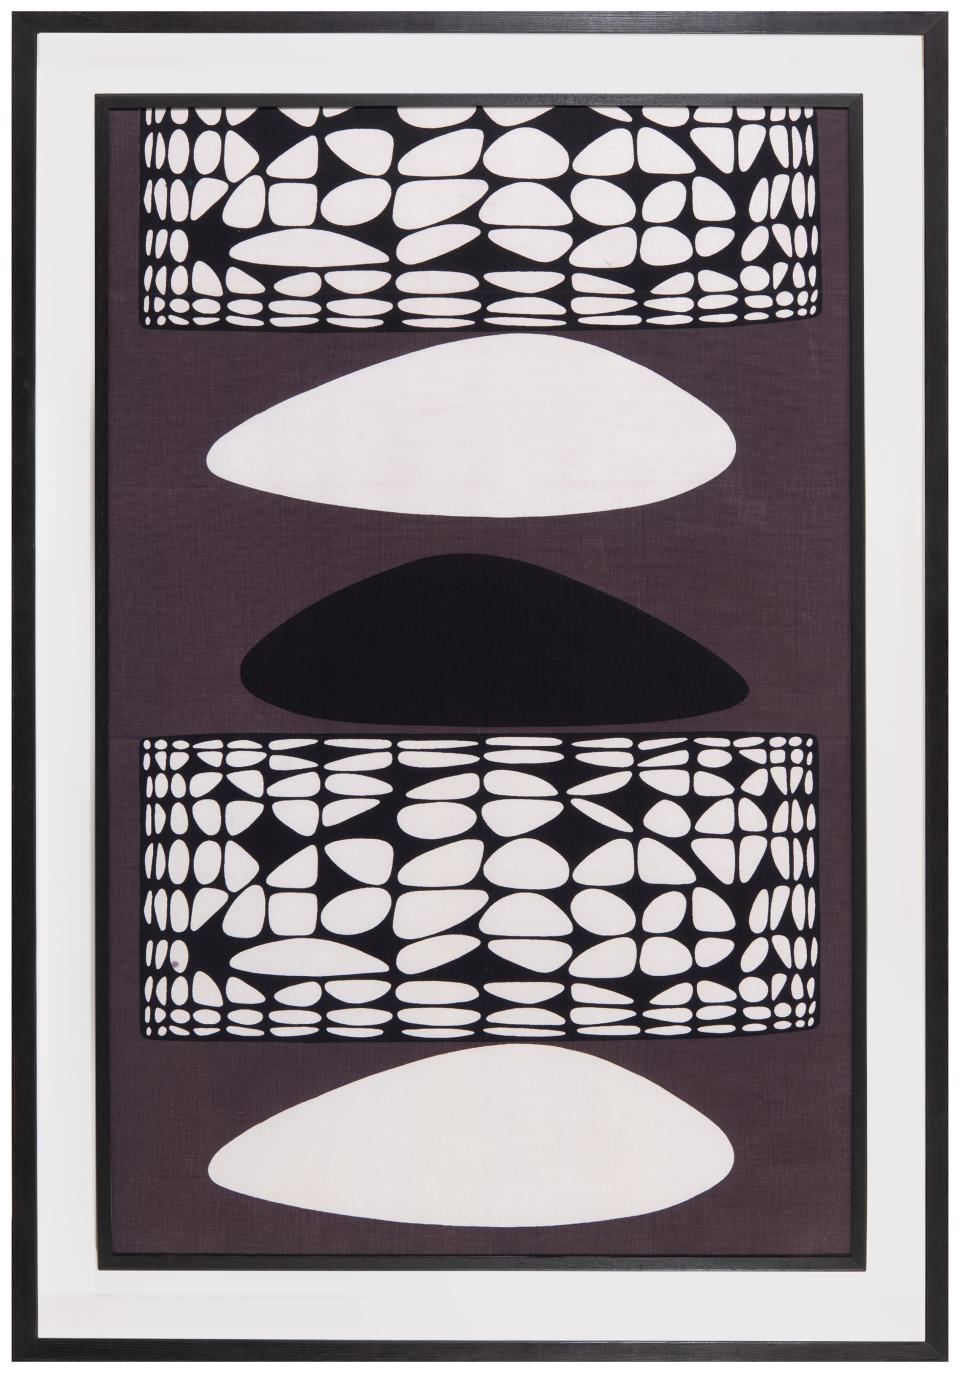 “Kernoo, 1962,” a screen print on cotton by Victor Vasarely.